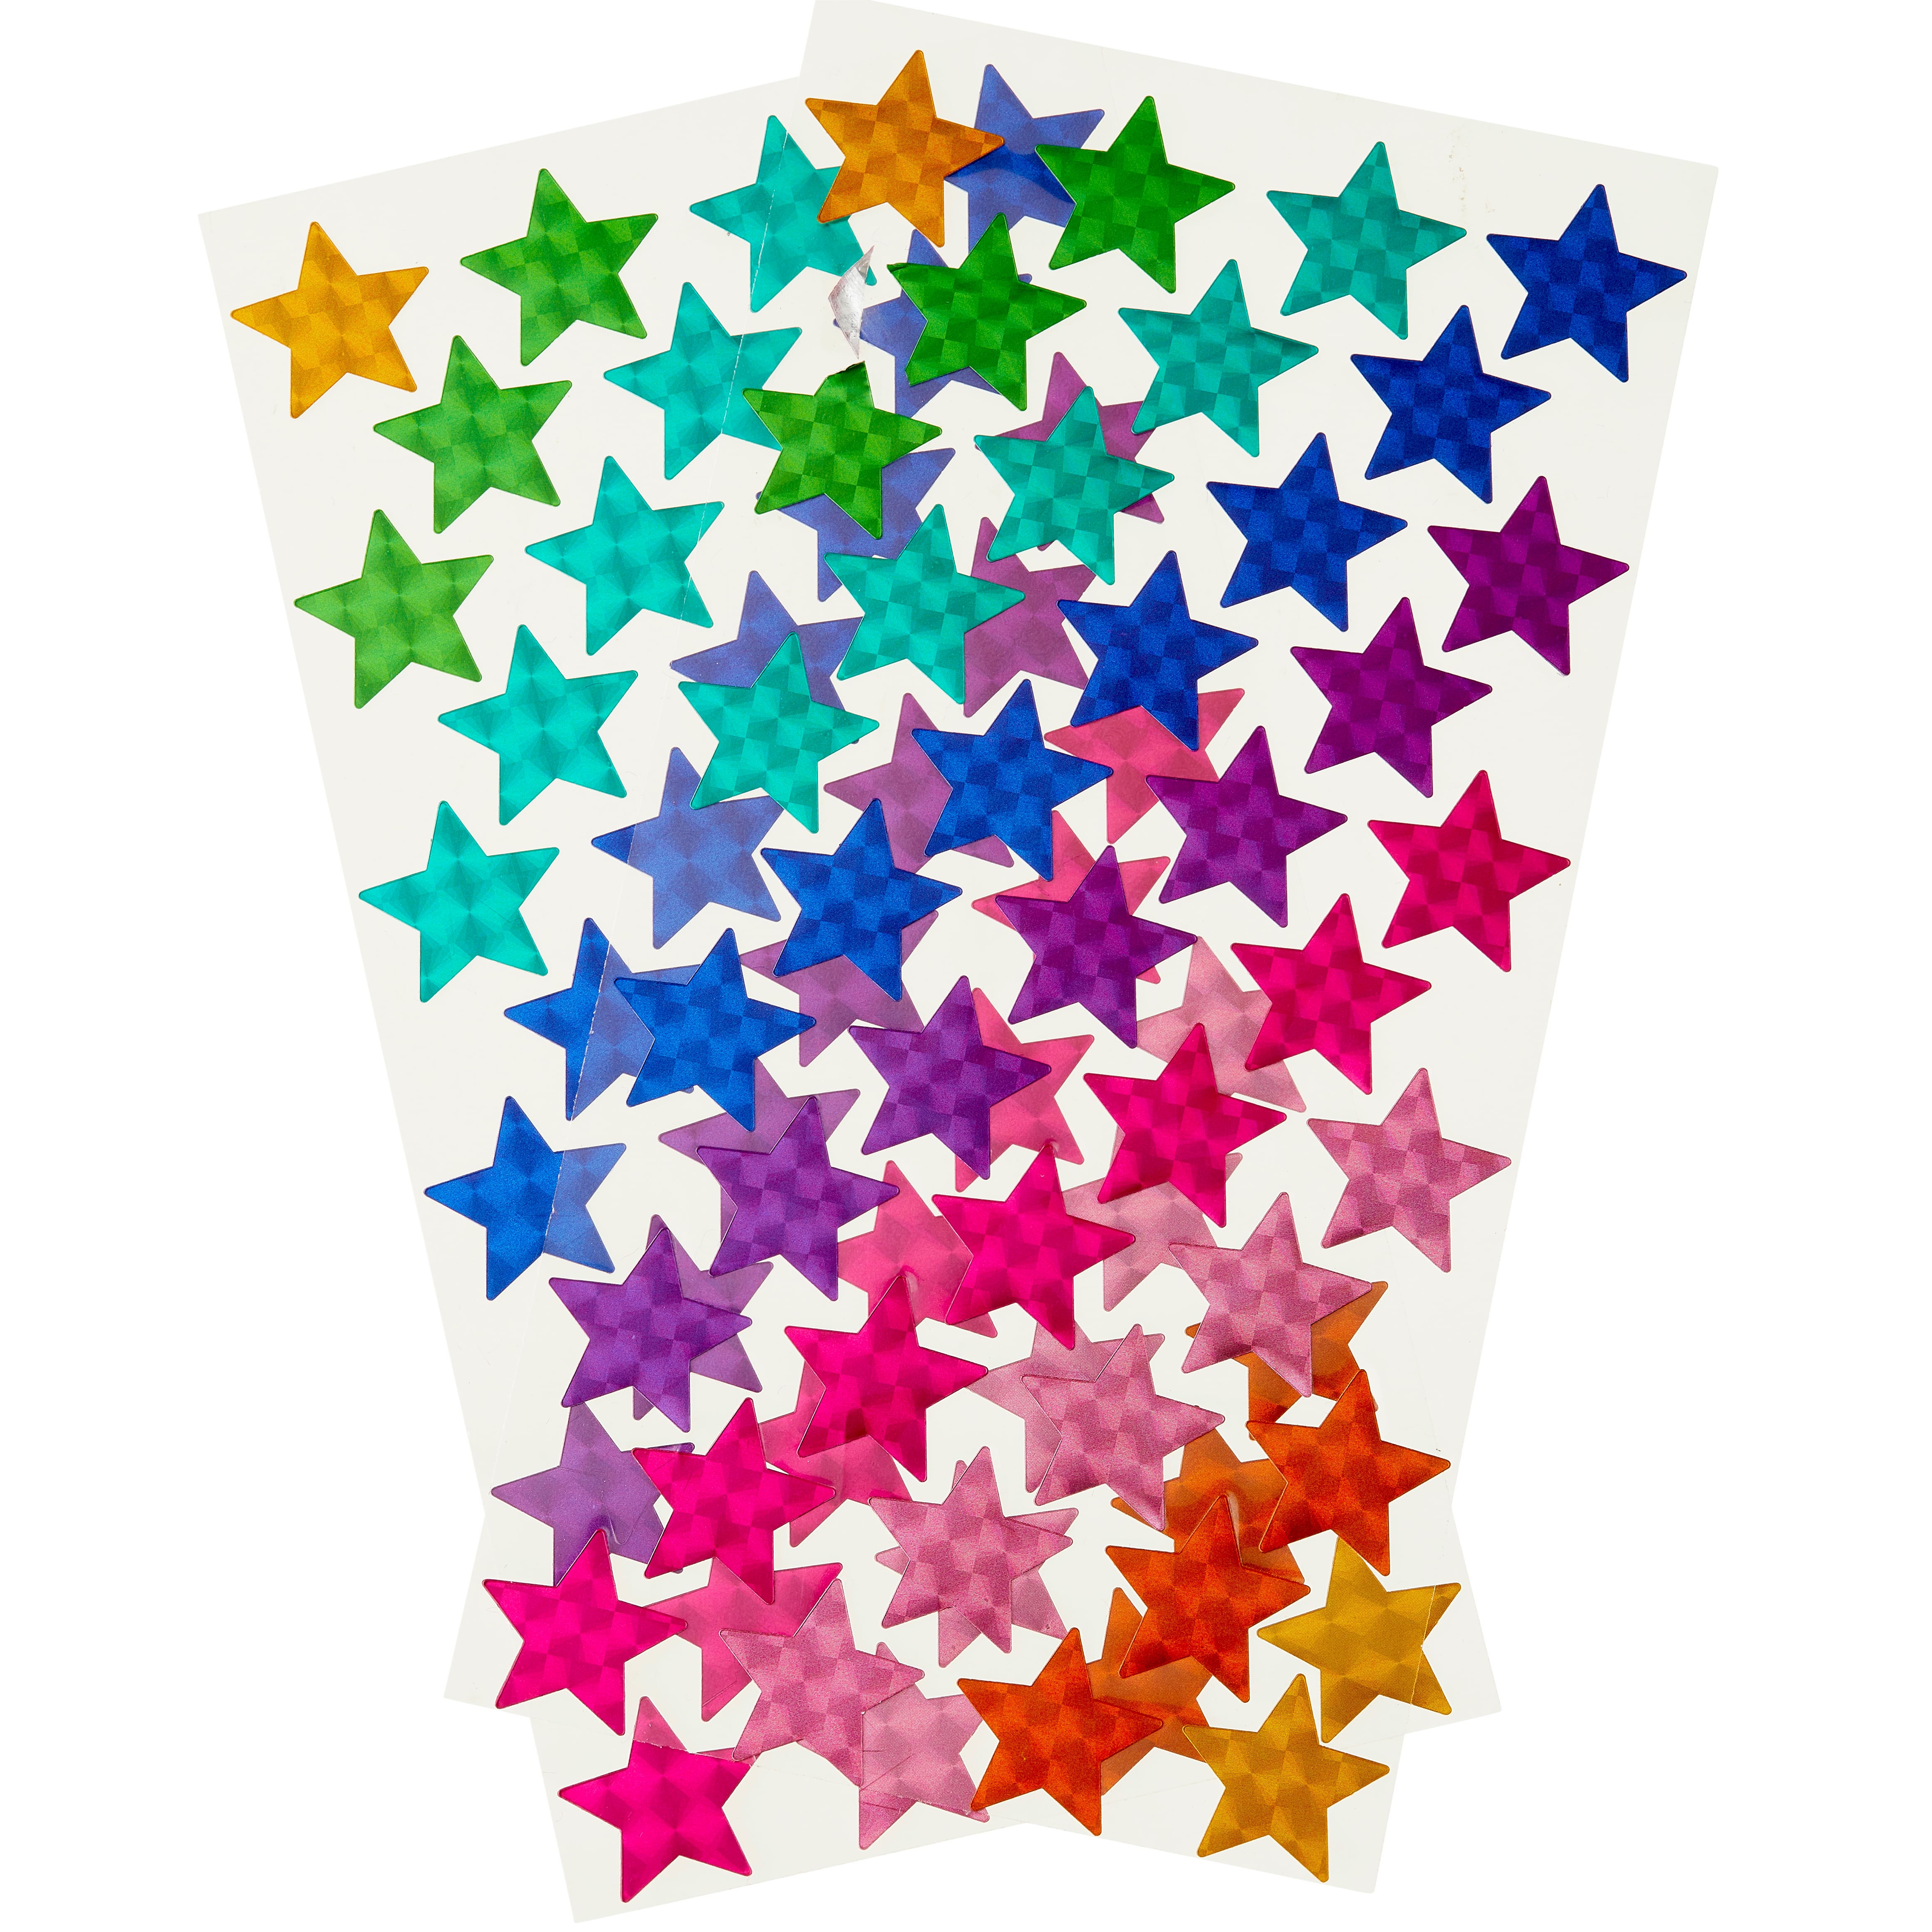 Mini Star Stickers by Recollections™